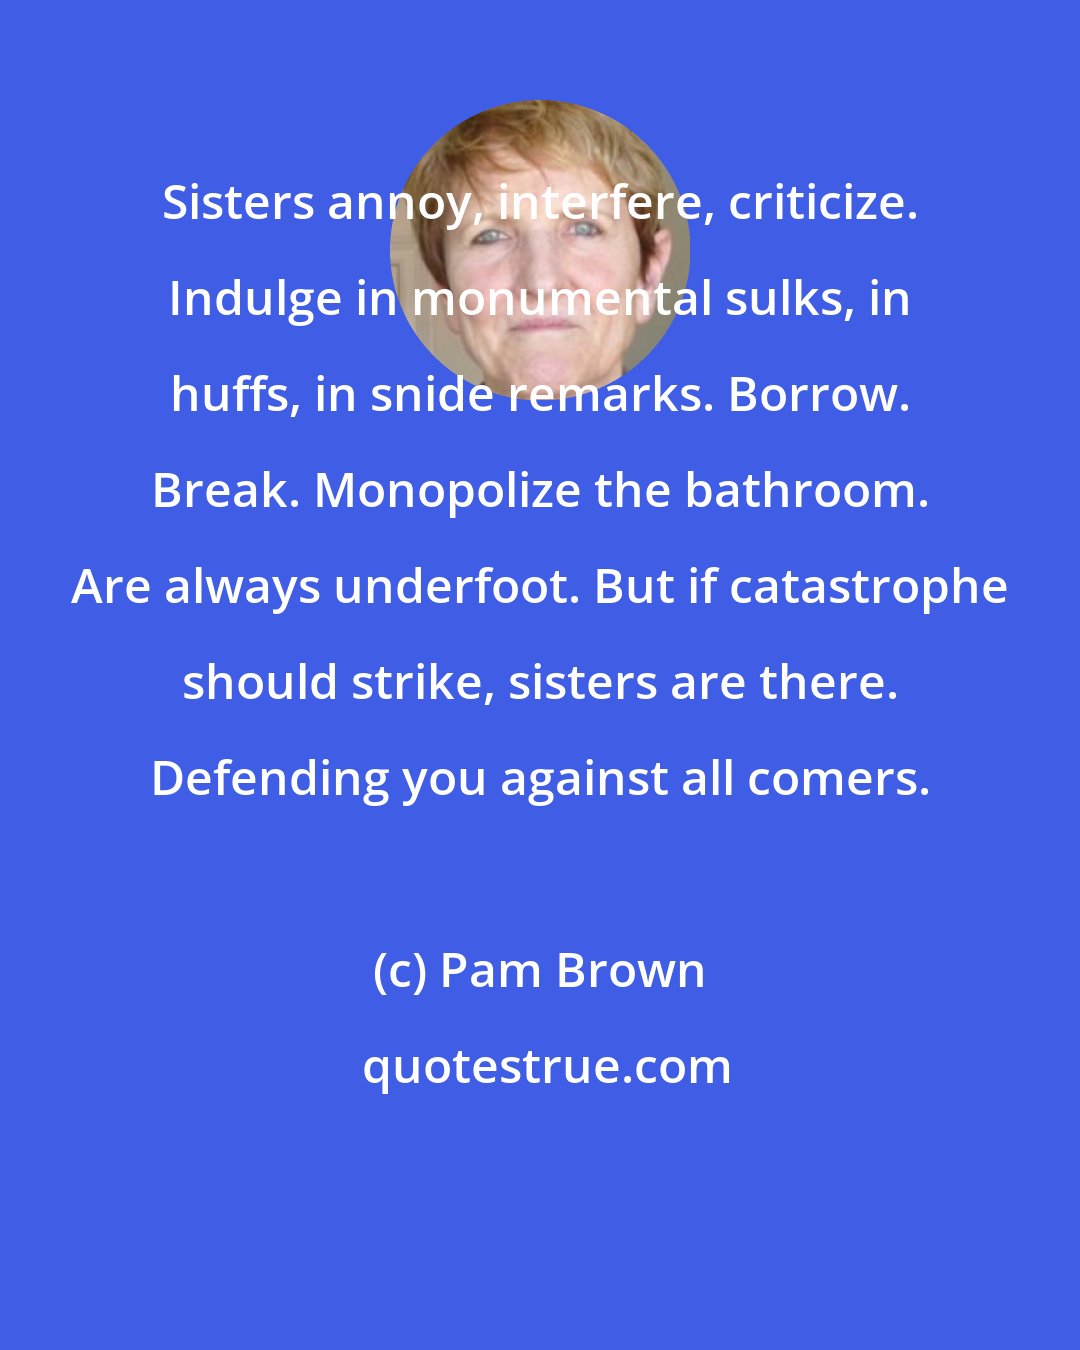 Pam Brown: Sisters annoy, interfere, criticize. Indulge in monumental sulks, in huffs, in snide remarks. Borrow. Break. Monopolize the bathroom. Are always underfoot. But if catastrophe should strike, sisters are there. Defending you against all comers.